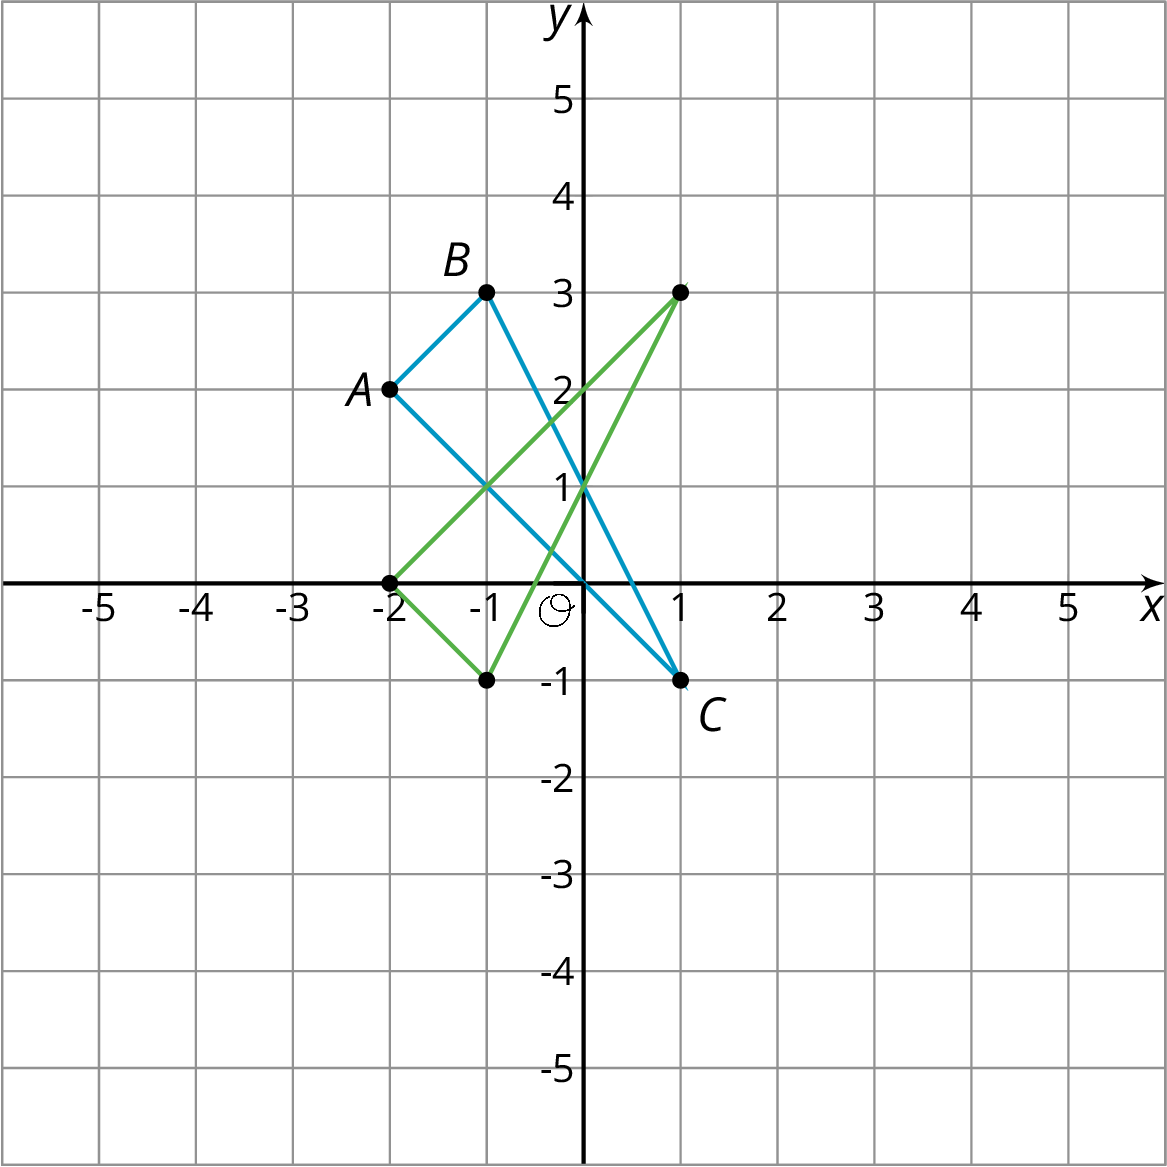 Triangle A B C on the x y plane with the origin labeled O. The numbers negative 5 through 5 appear on both the x axis and the y axis. Point A has the coordinates negative 2 comma 2. Point B has the coordinates negative 1 comma 3. Point C has the coordinates 1 comma negative 1.  A second triangle is drawn on the x y plane.The second triangle has the points with following coordinates: negative 1 comma negative 1, negative 2 comma 0, and 1 comma negative 3. 